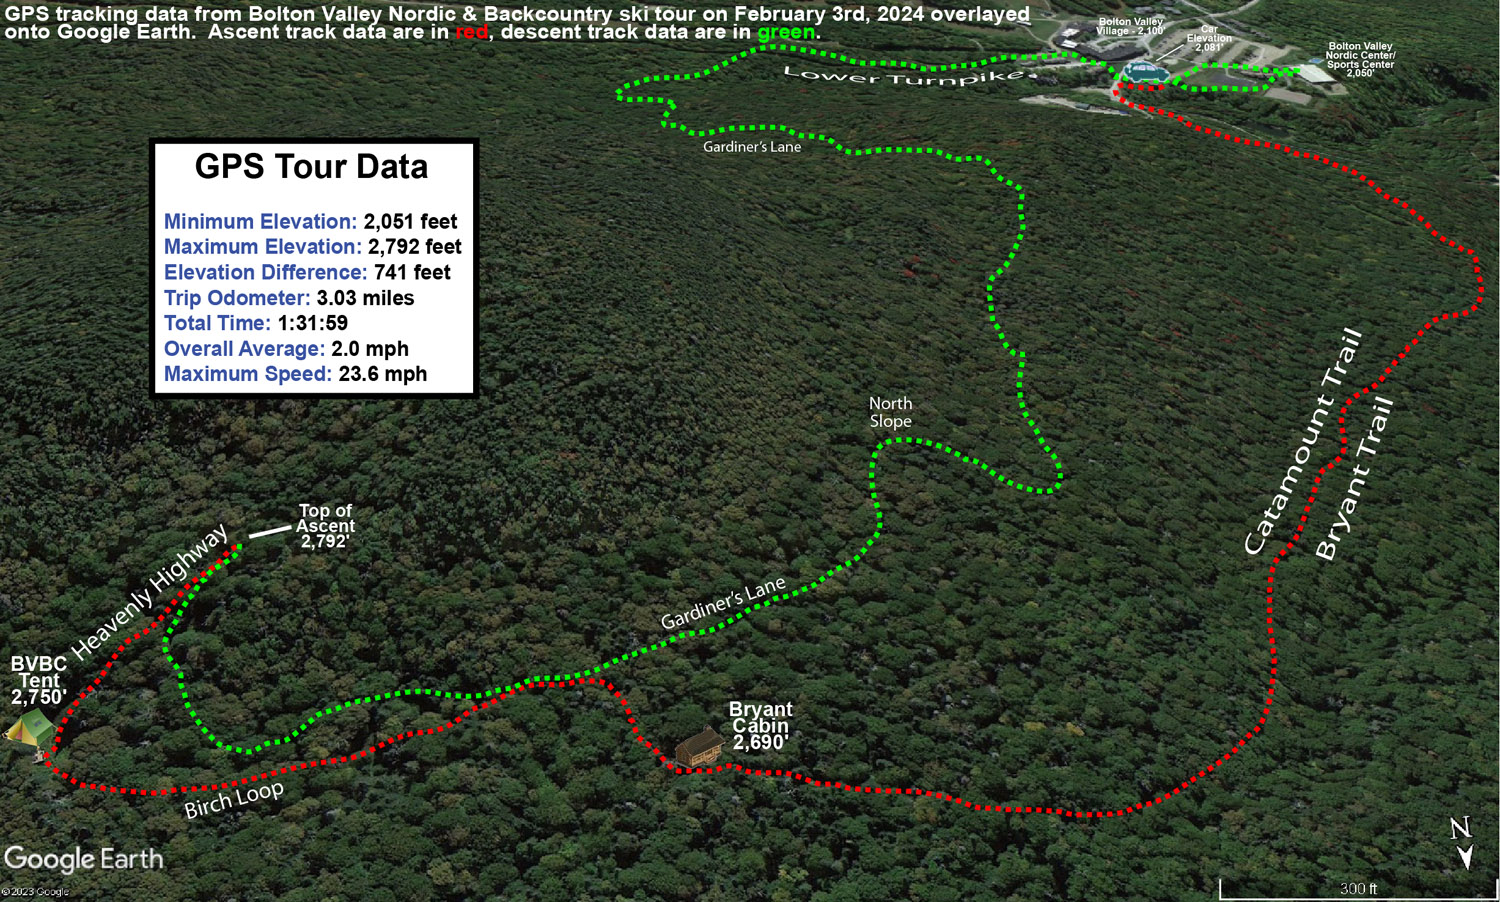 An image of a Google Earth map overlaid with GPS tracking data from a February ski tour on the Bolton Valley Nordic and Backcountry Network near Bolton Valley Ski Resort in Vermont